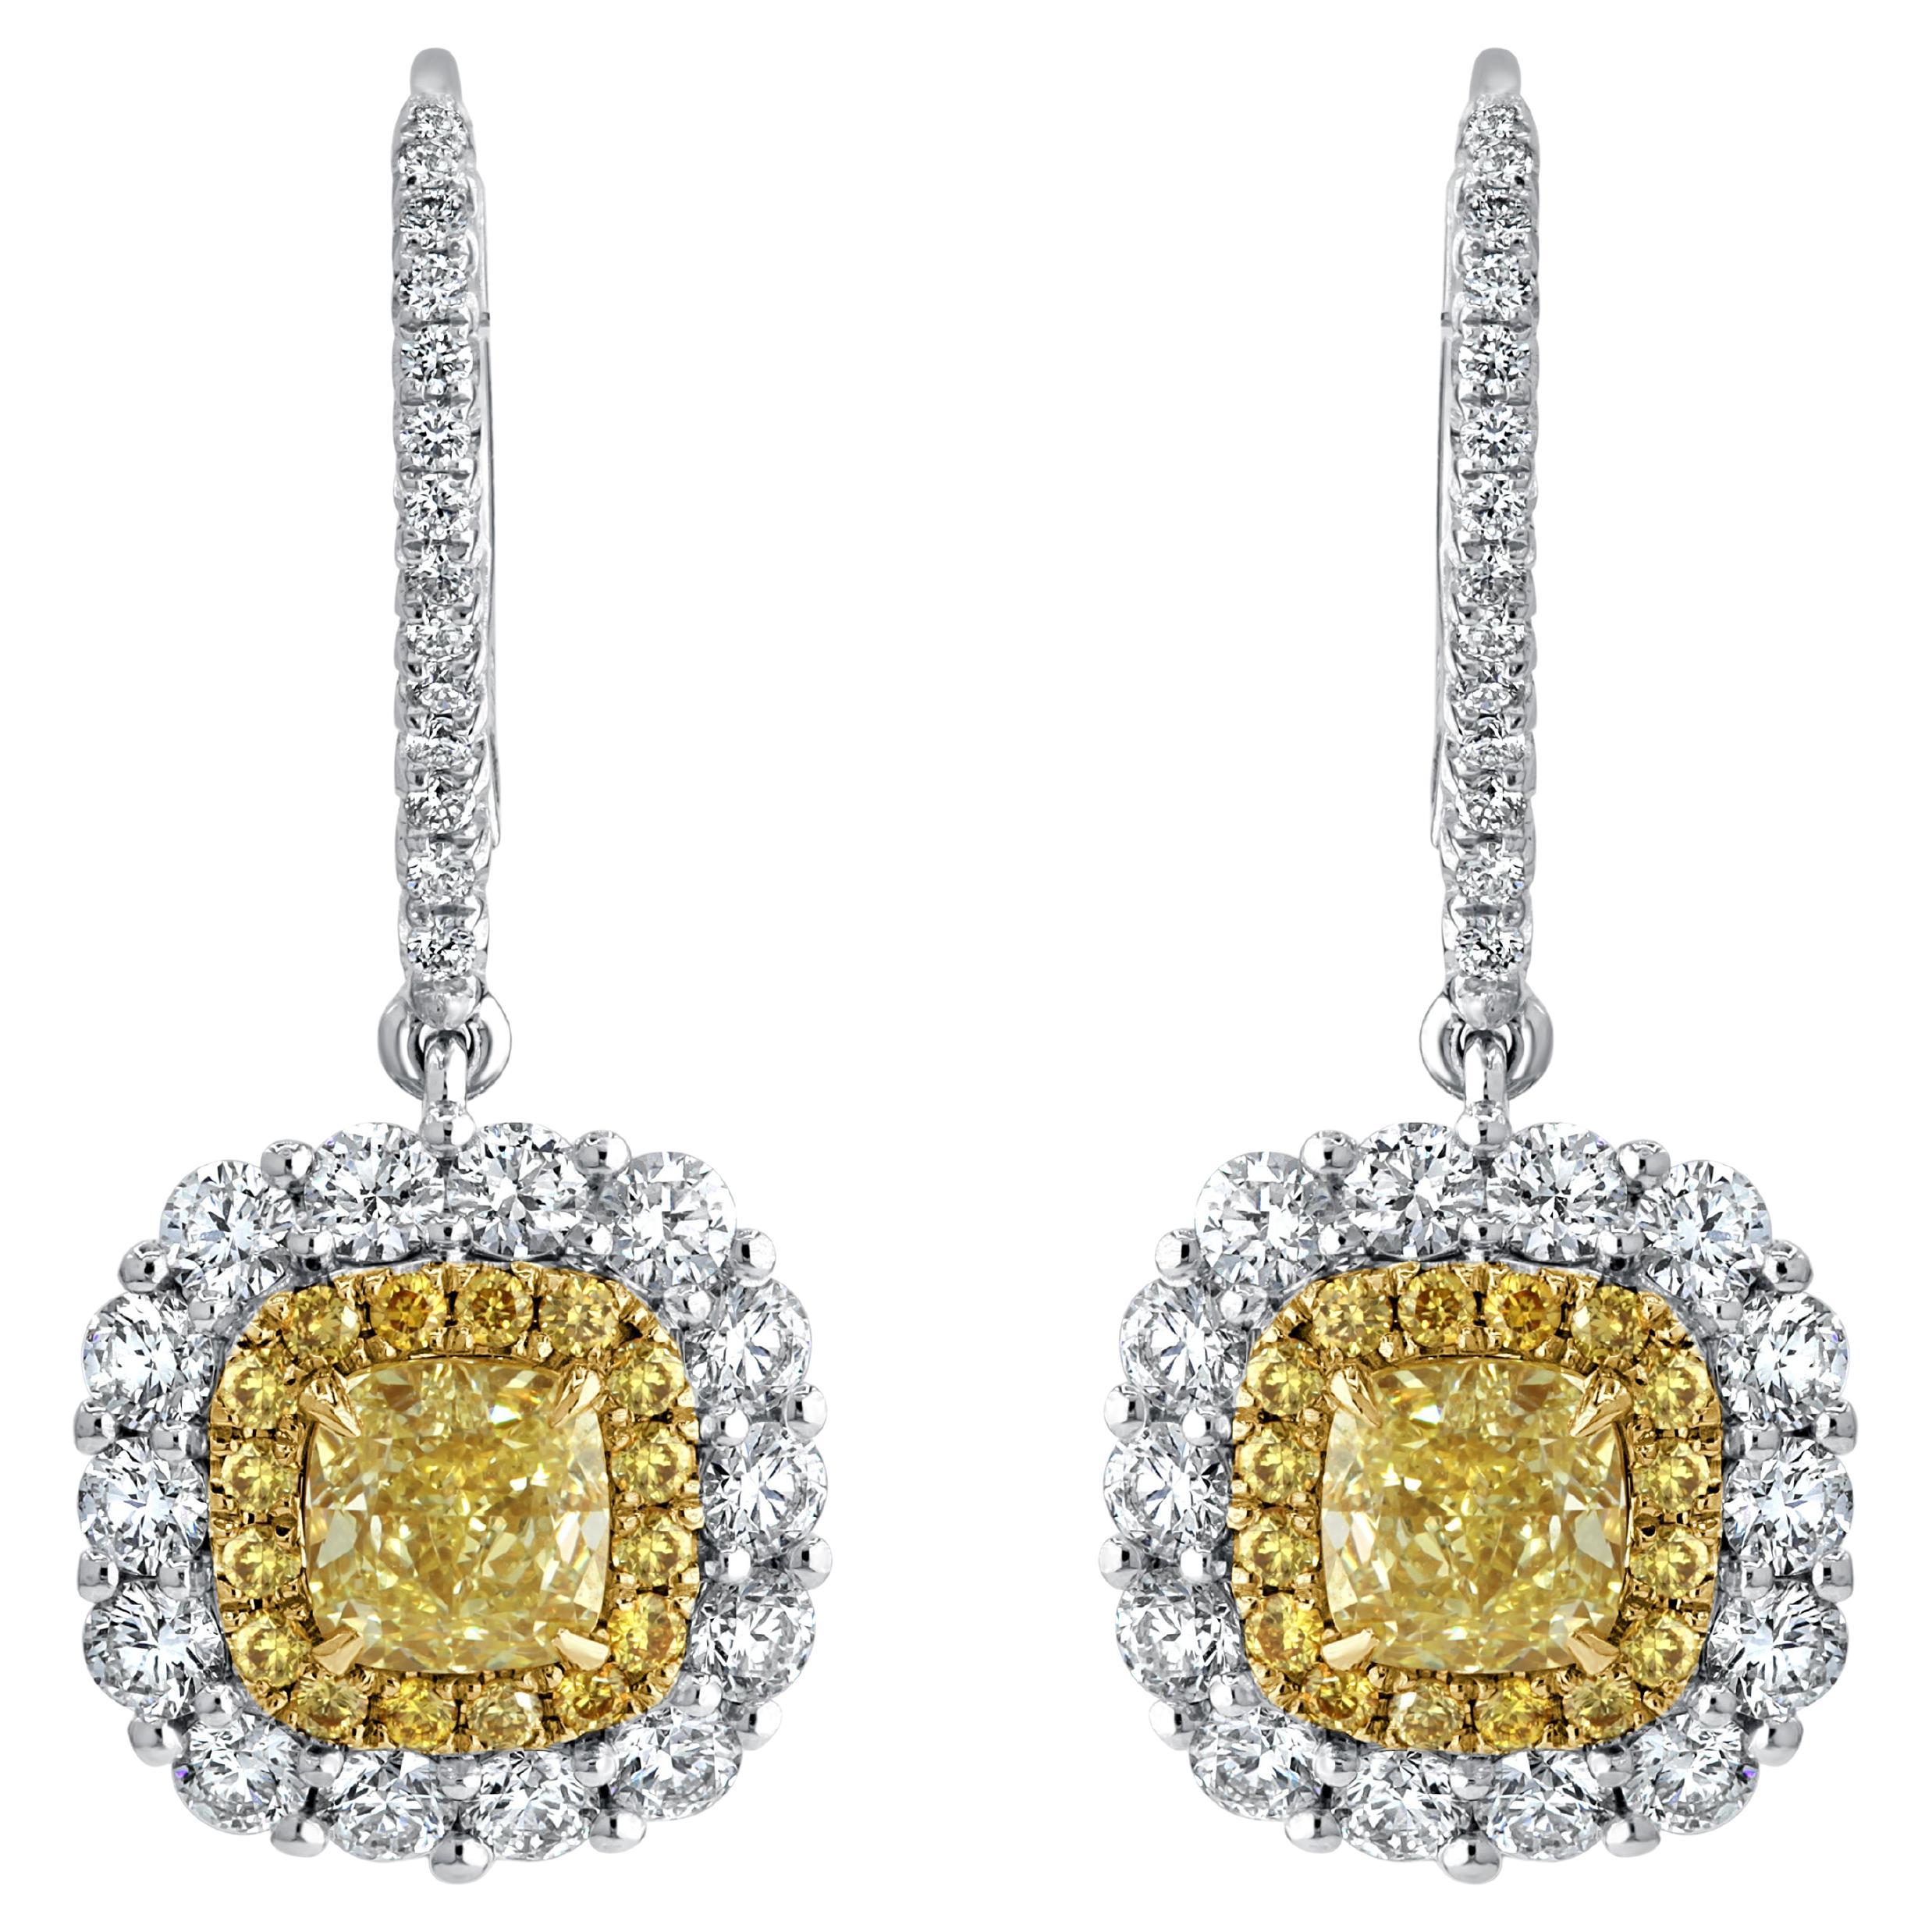 2.95 Carat T.W. Yellow/White Diamond Earrings, with 1.4ct GIA centers ref1163